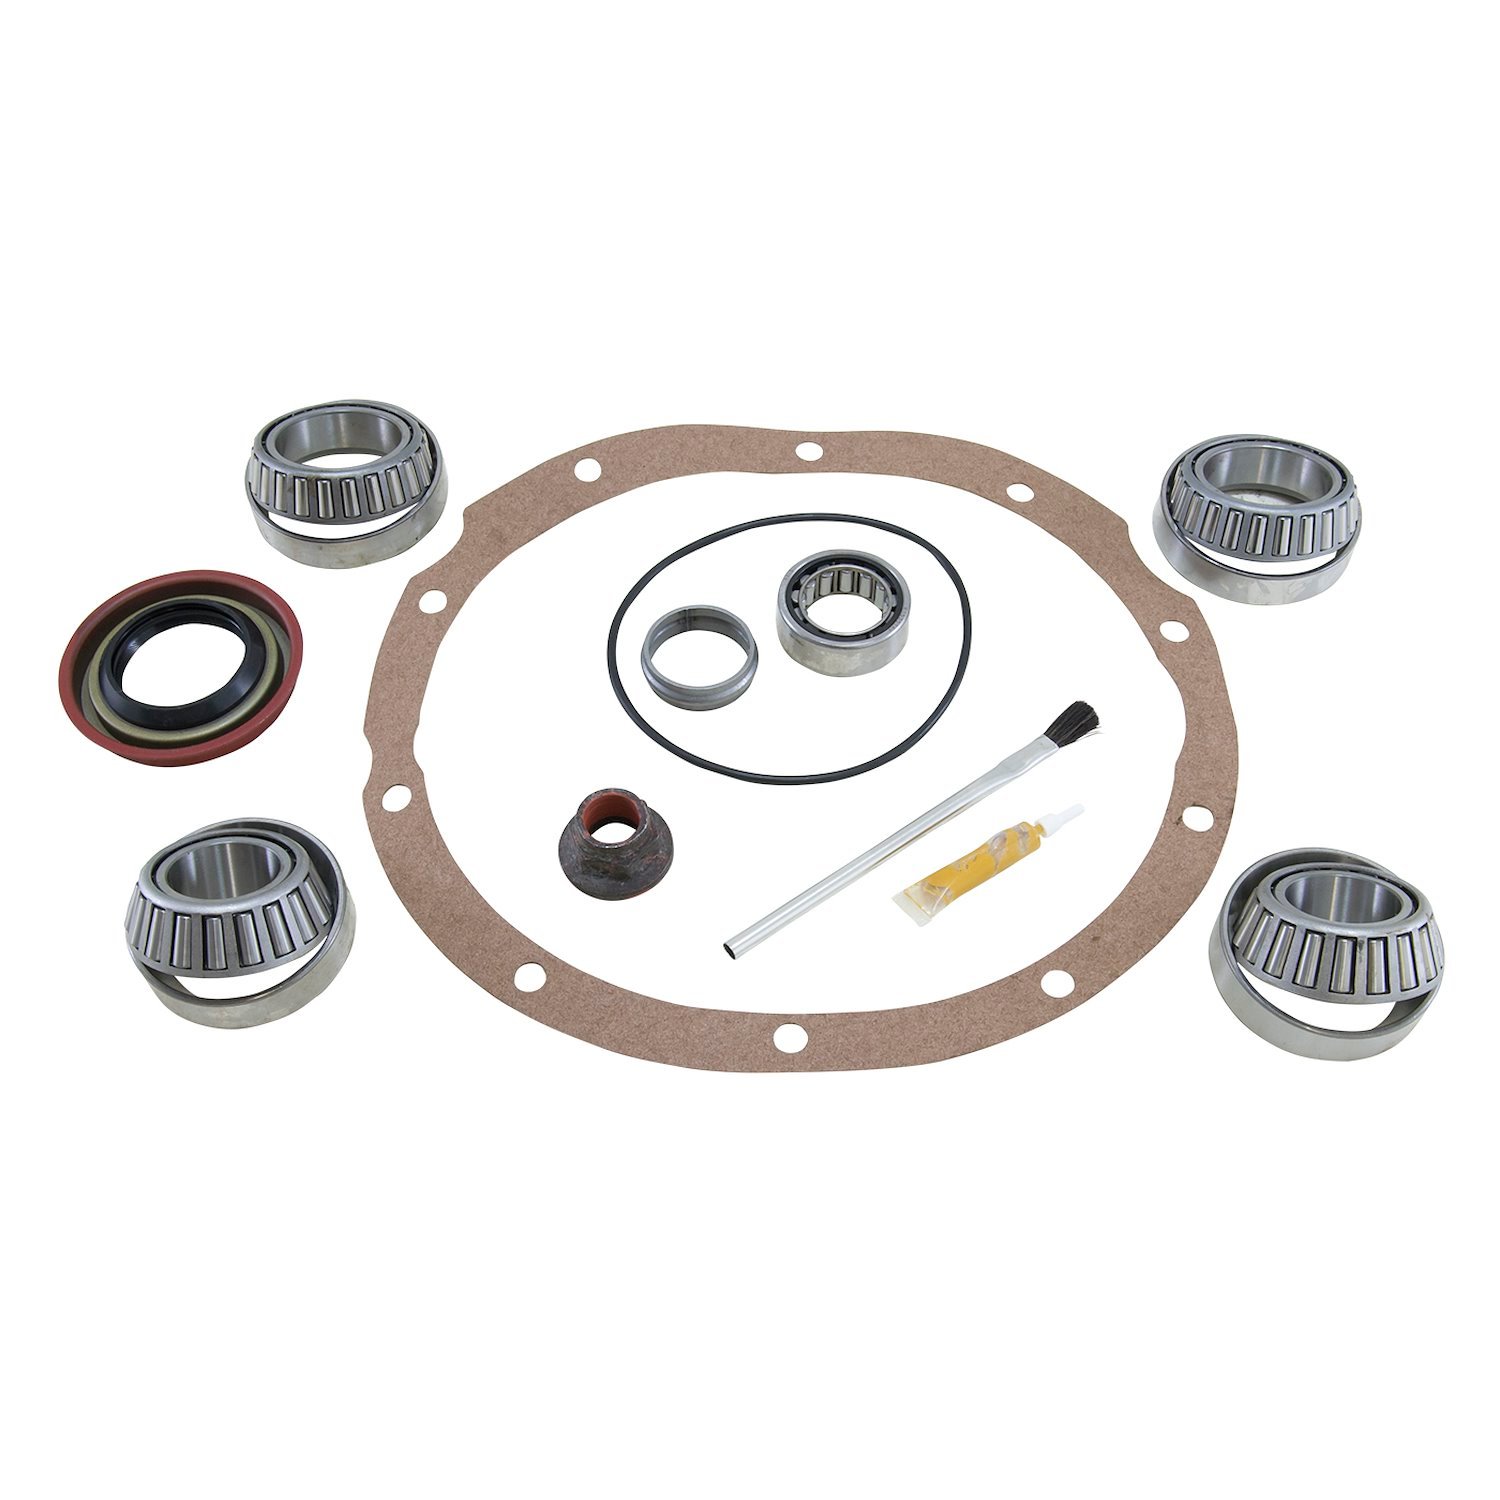 Bearing Install Kit For Ford Daytona 9 in. Differential, Lm102910 Bearings